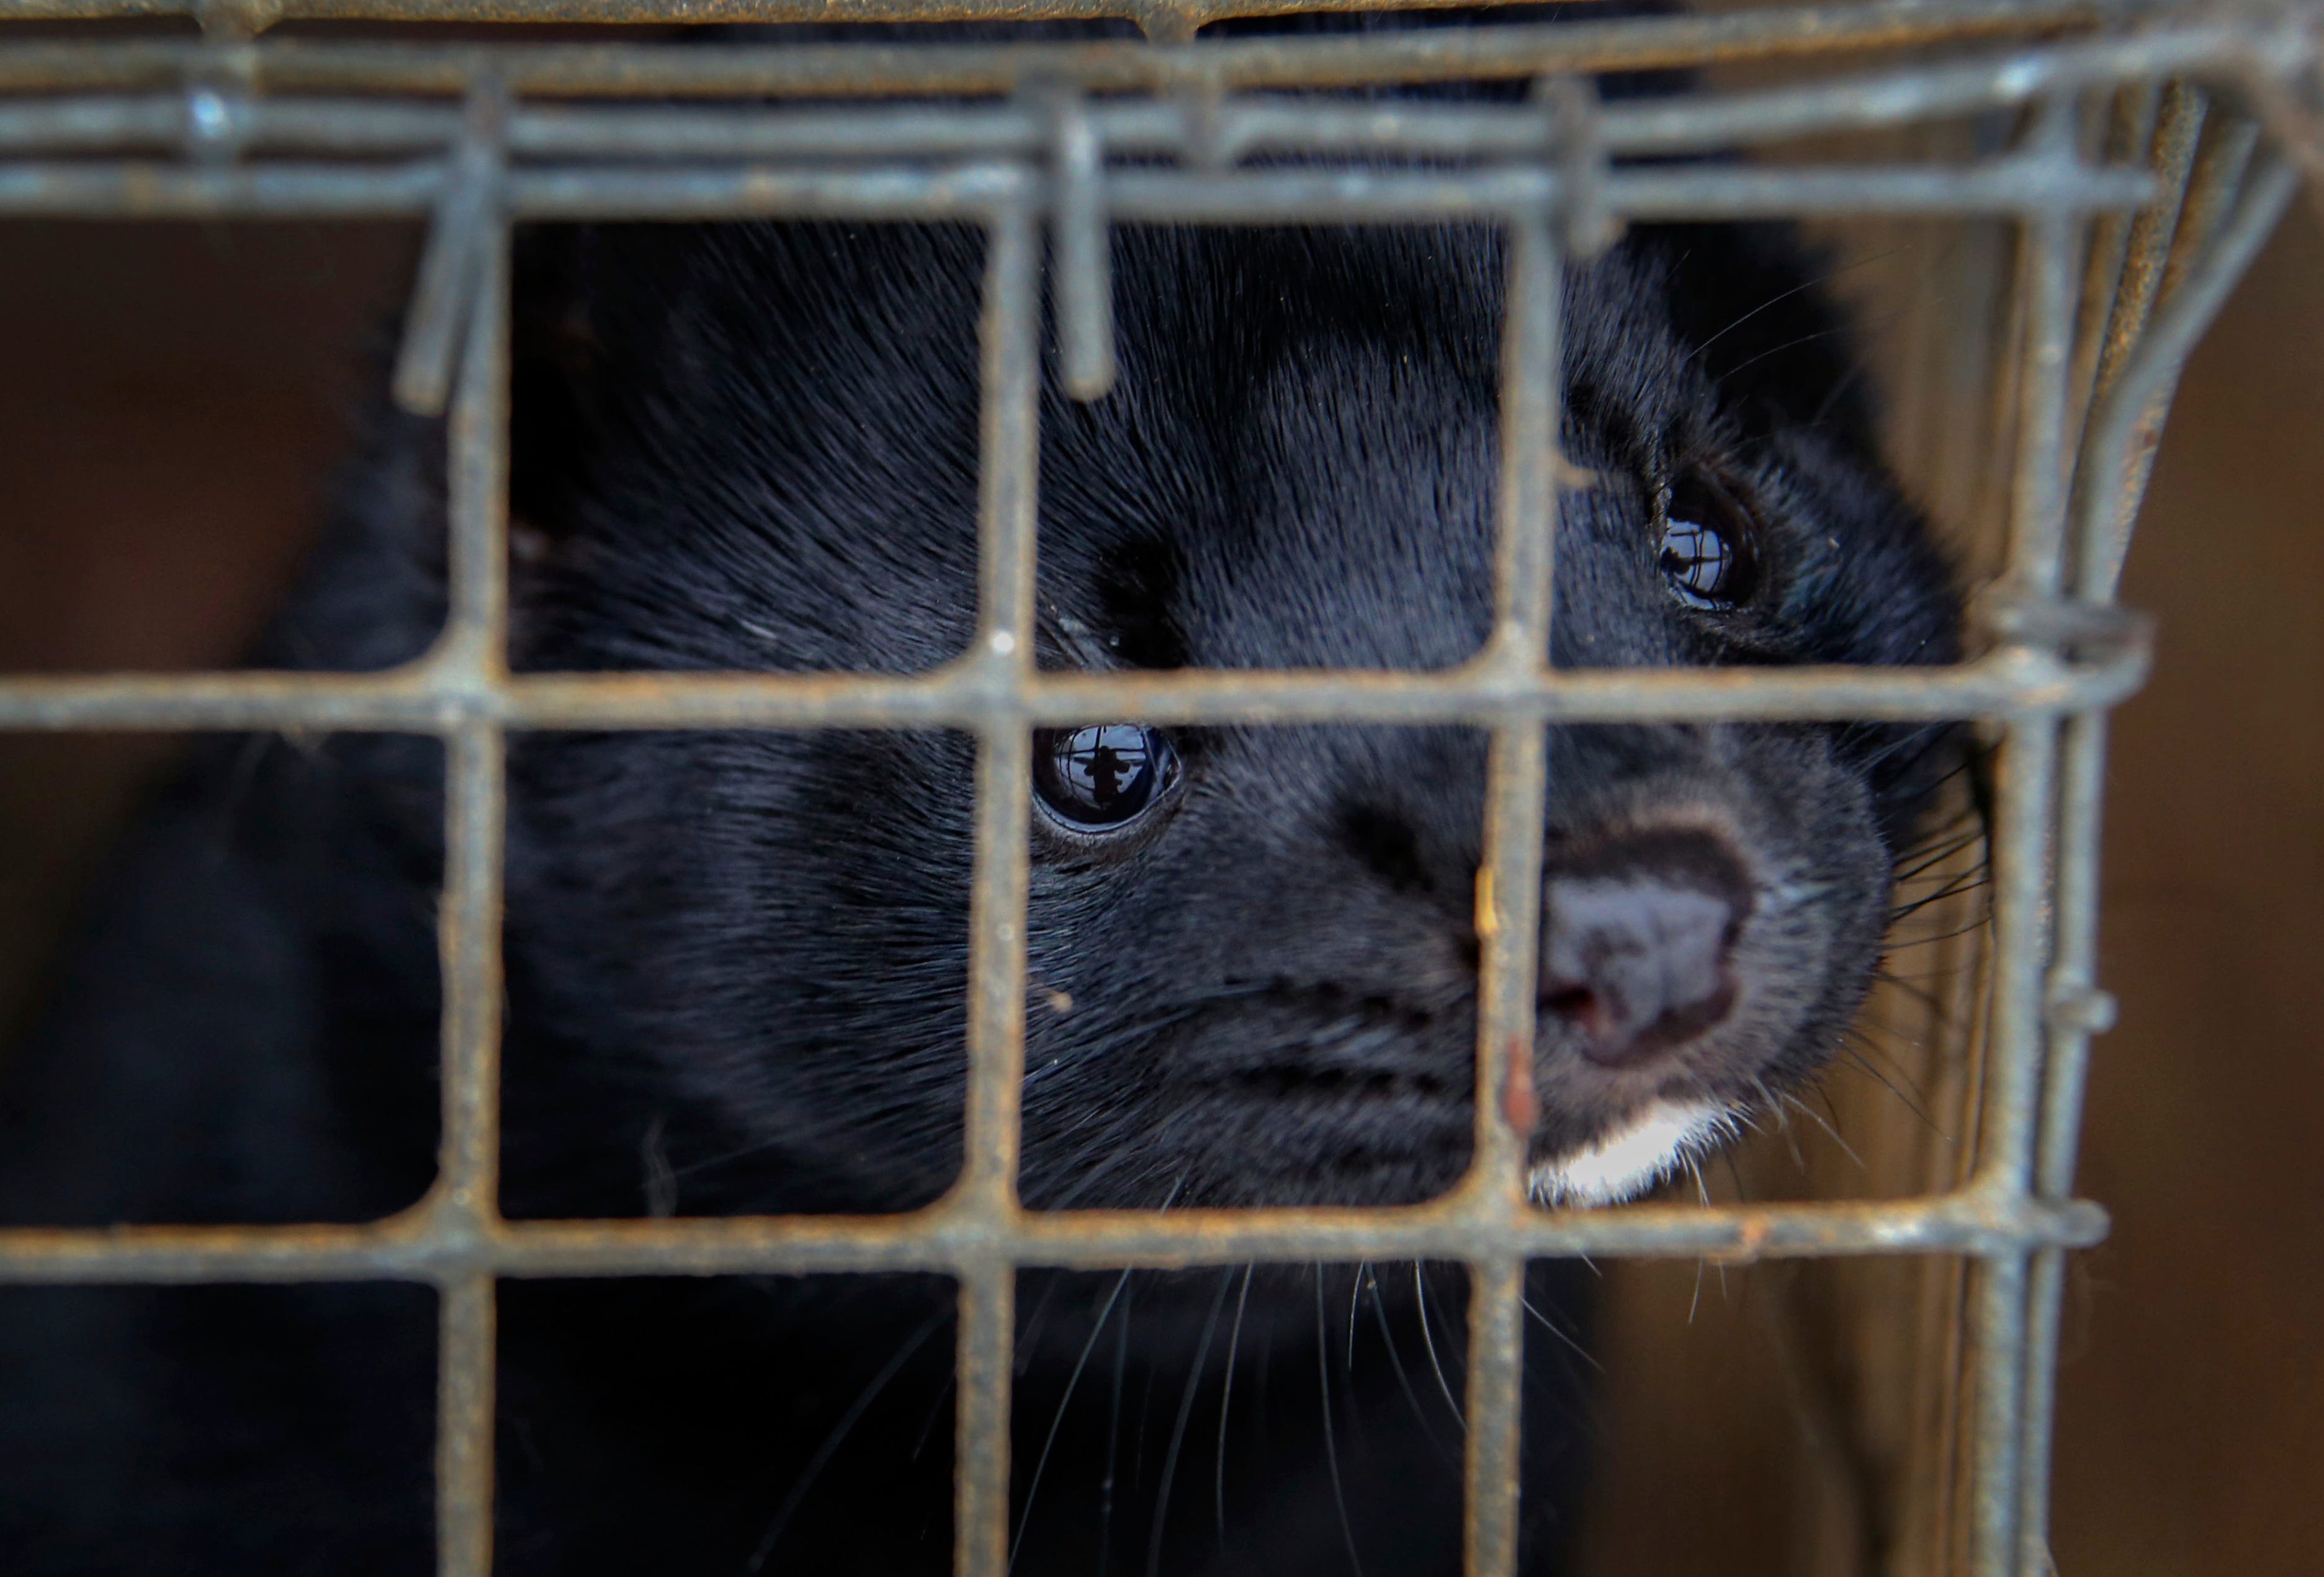 Industry exports say growing coronavirus spread among humans in state increases risk for mink farms.